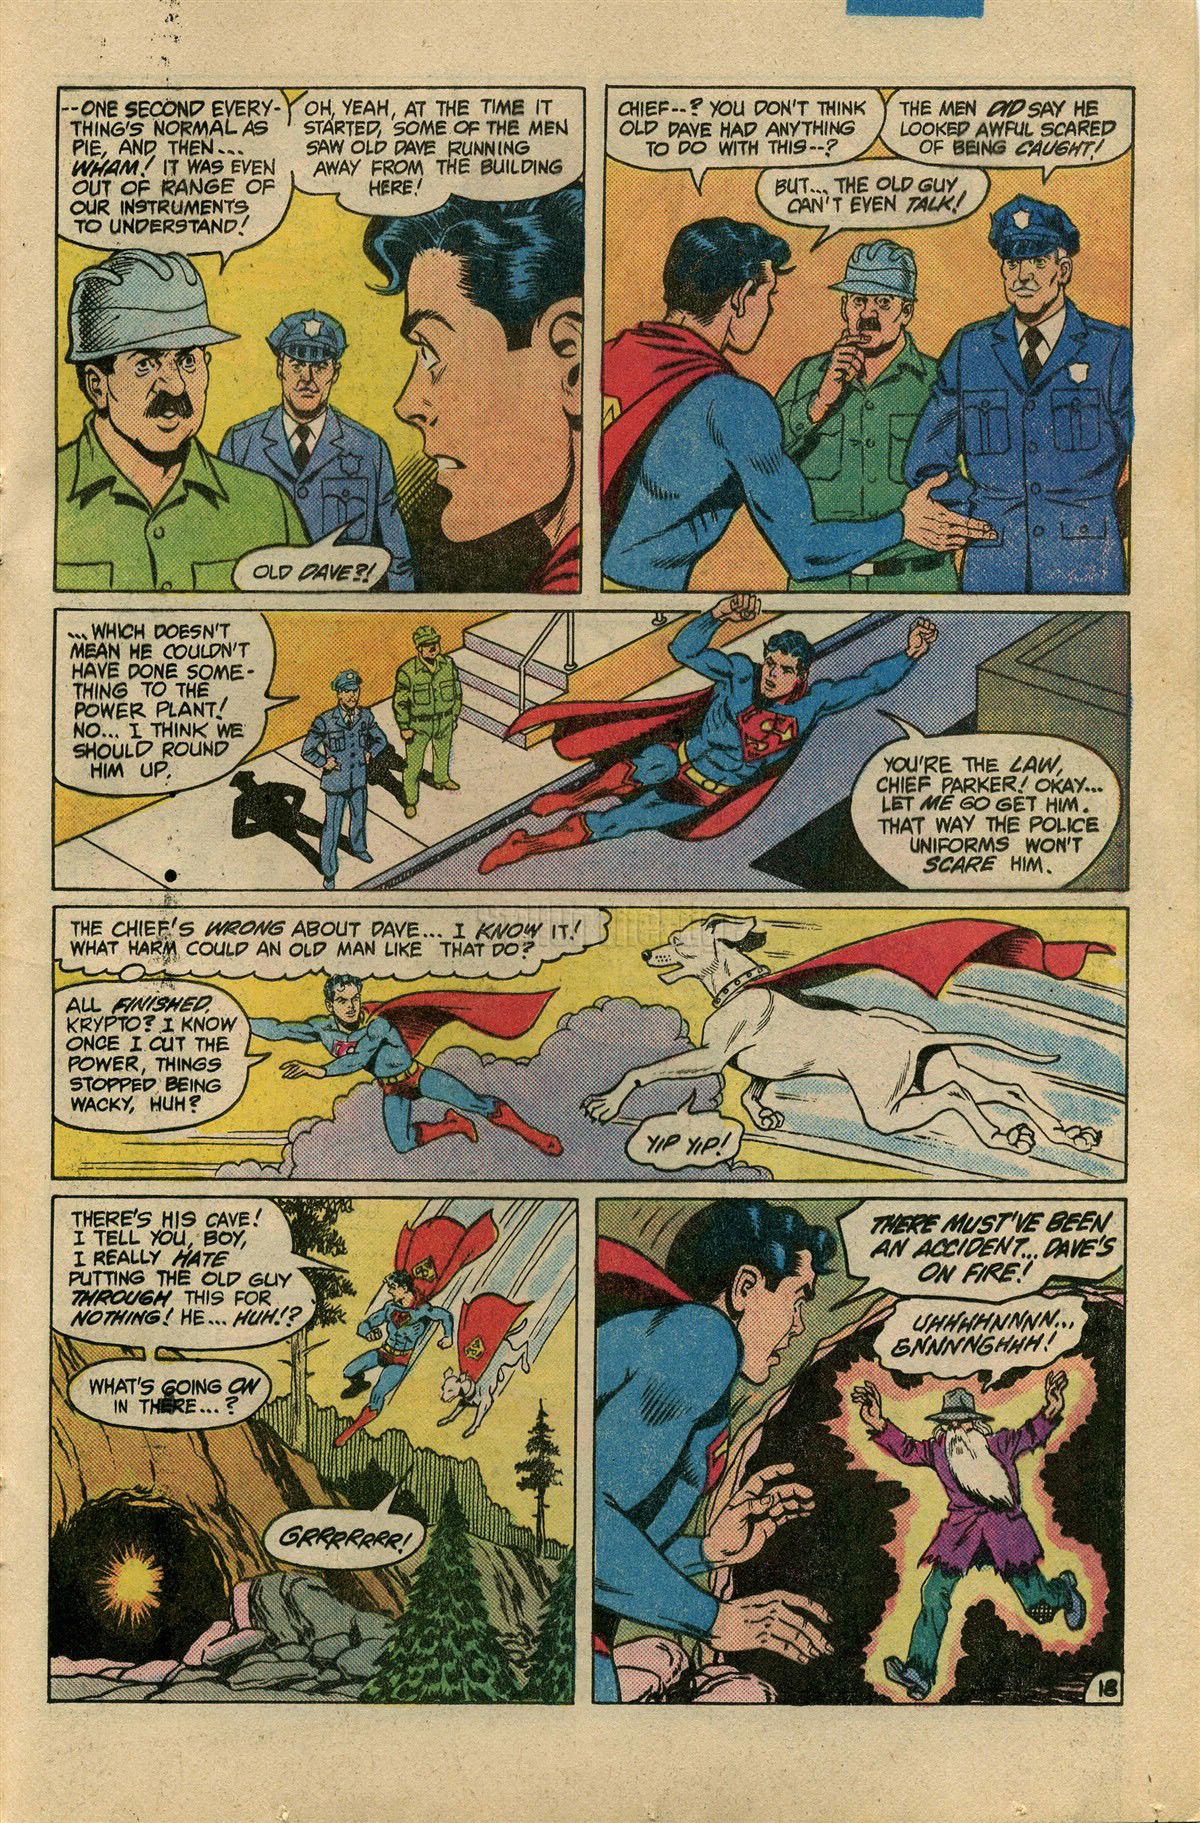 The New Adventures of Superboy 52 Page 23